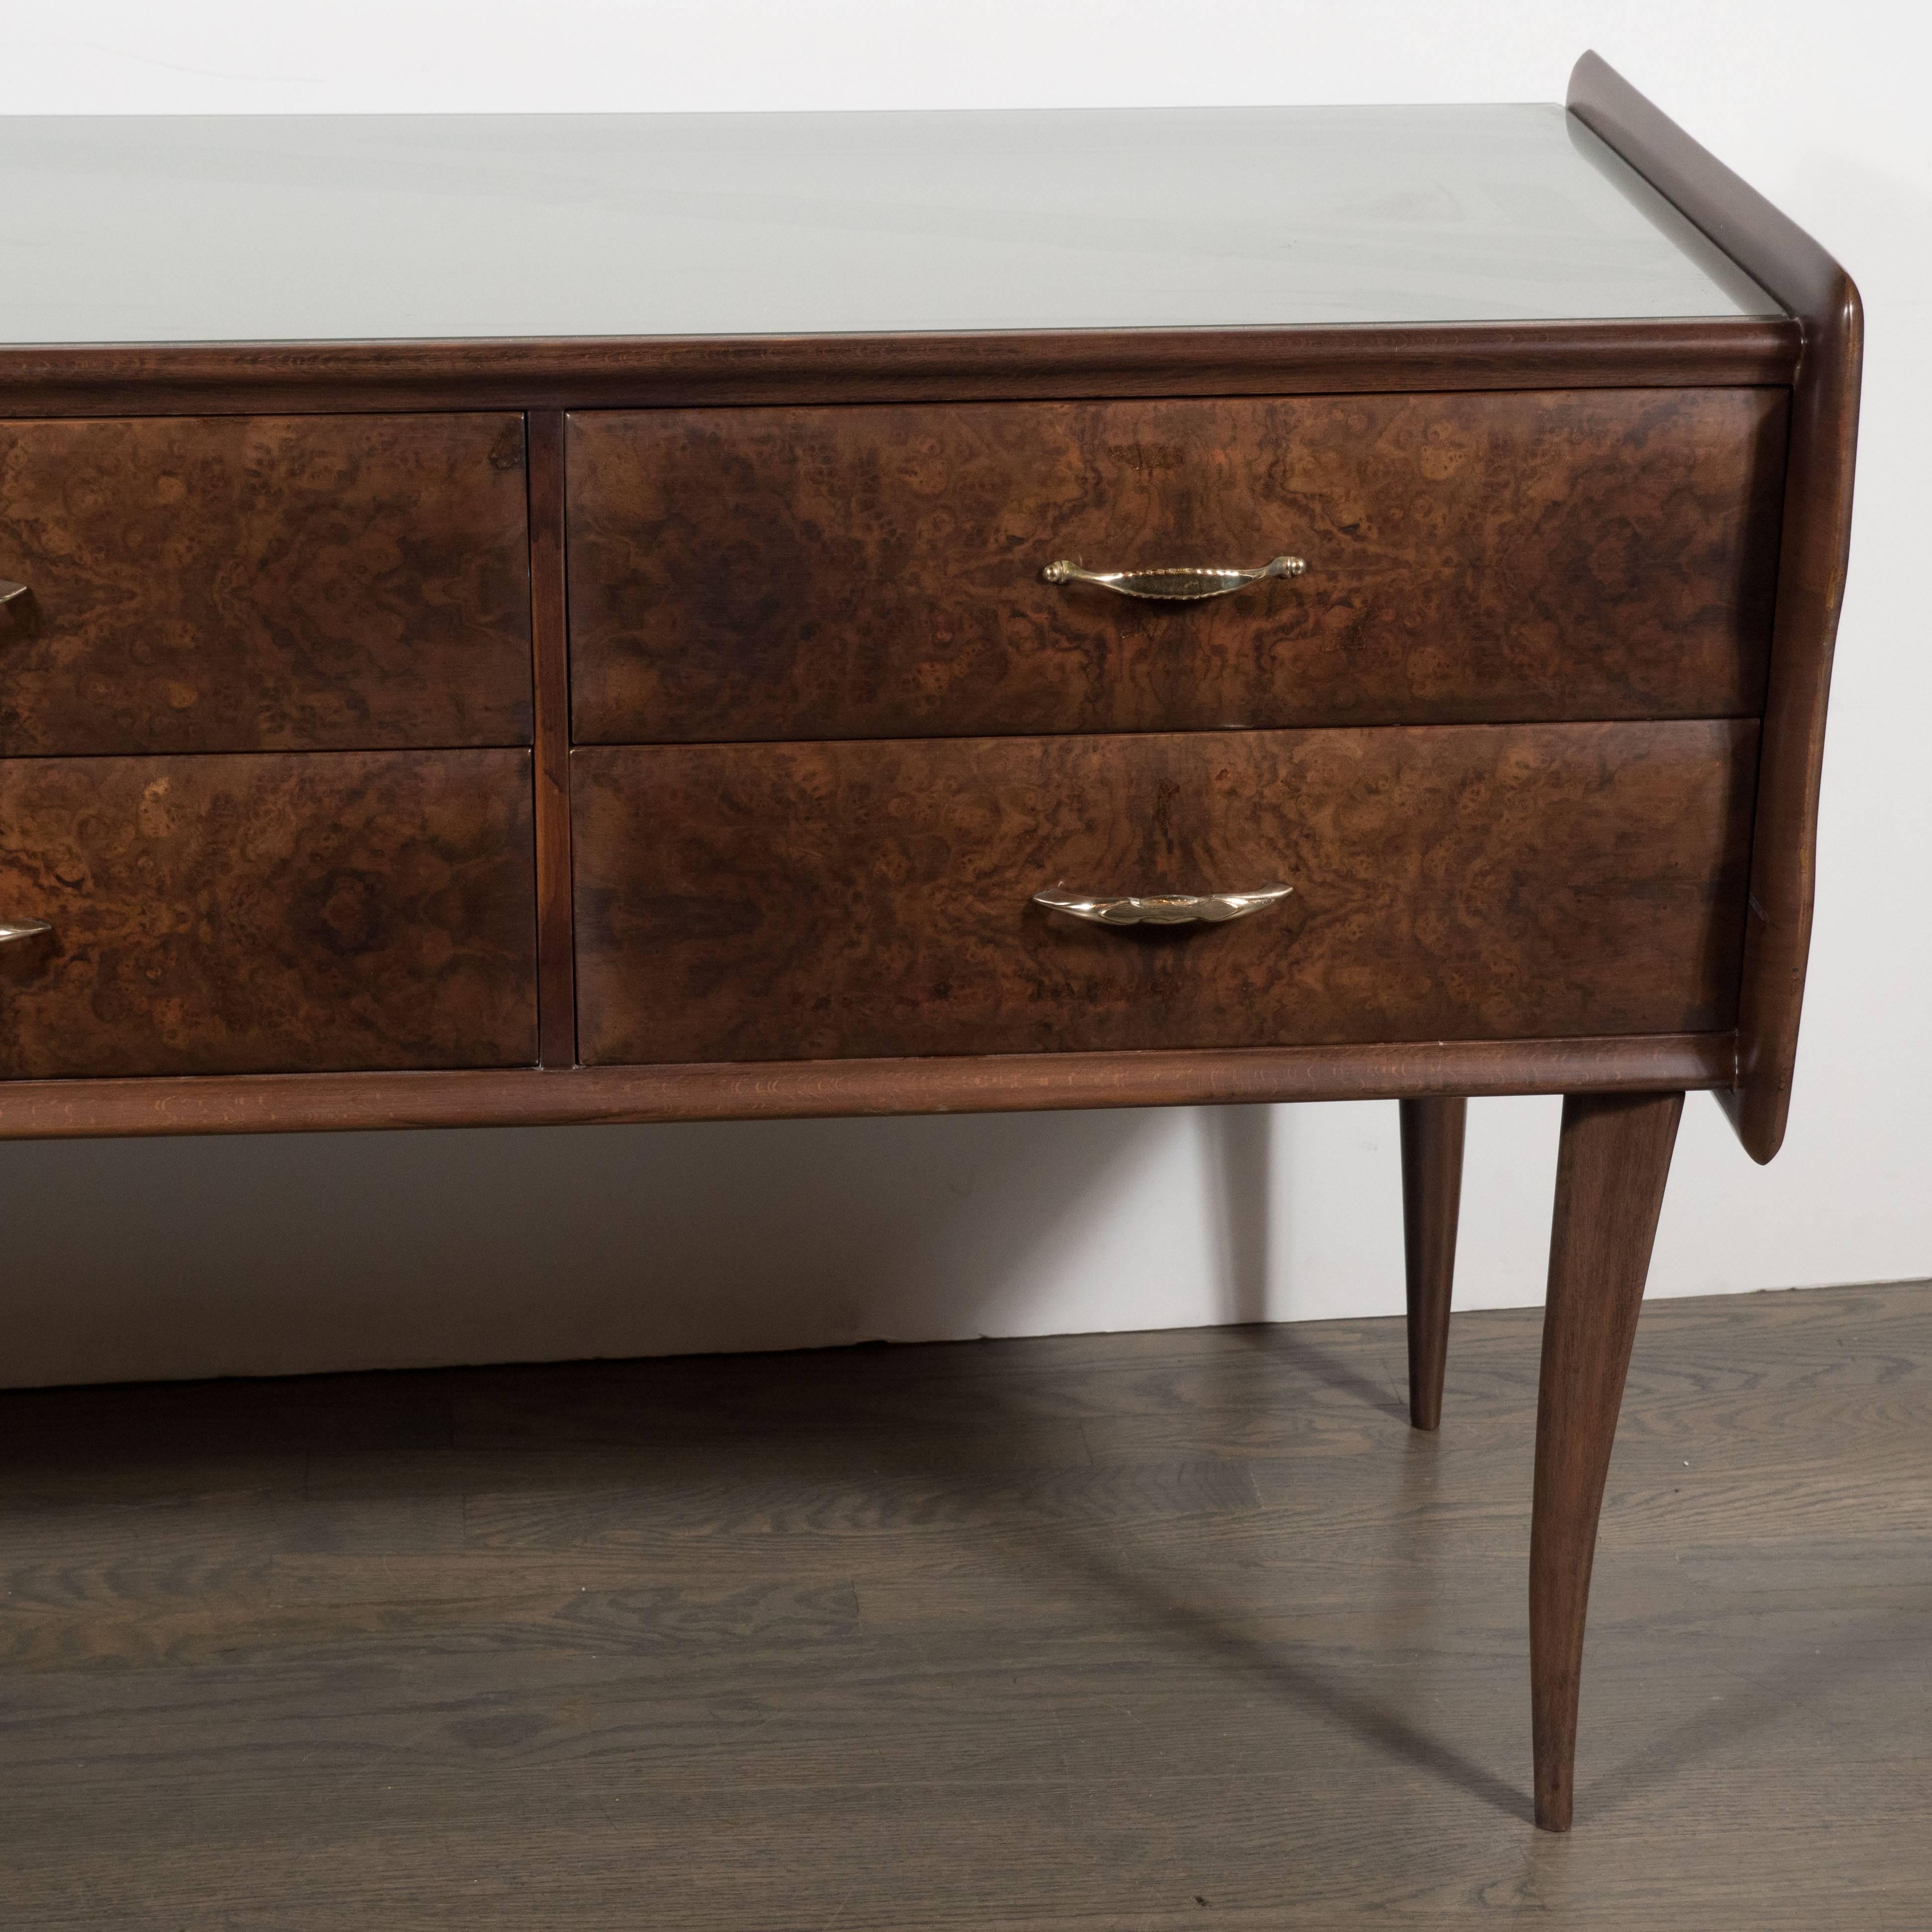 Mid-20th Century Italian Midcentury Chest in Walnut with Stylized Brass Pulls and Vitrolite Top For Sale